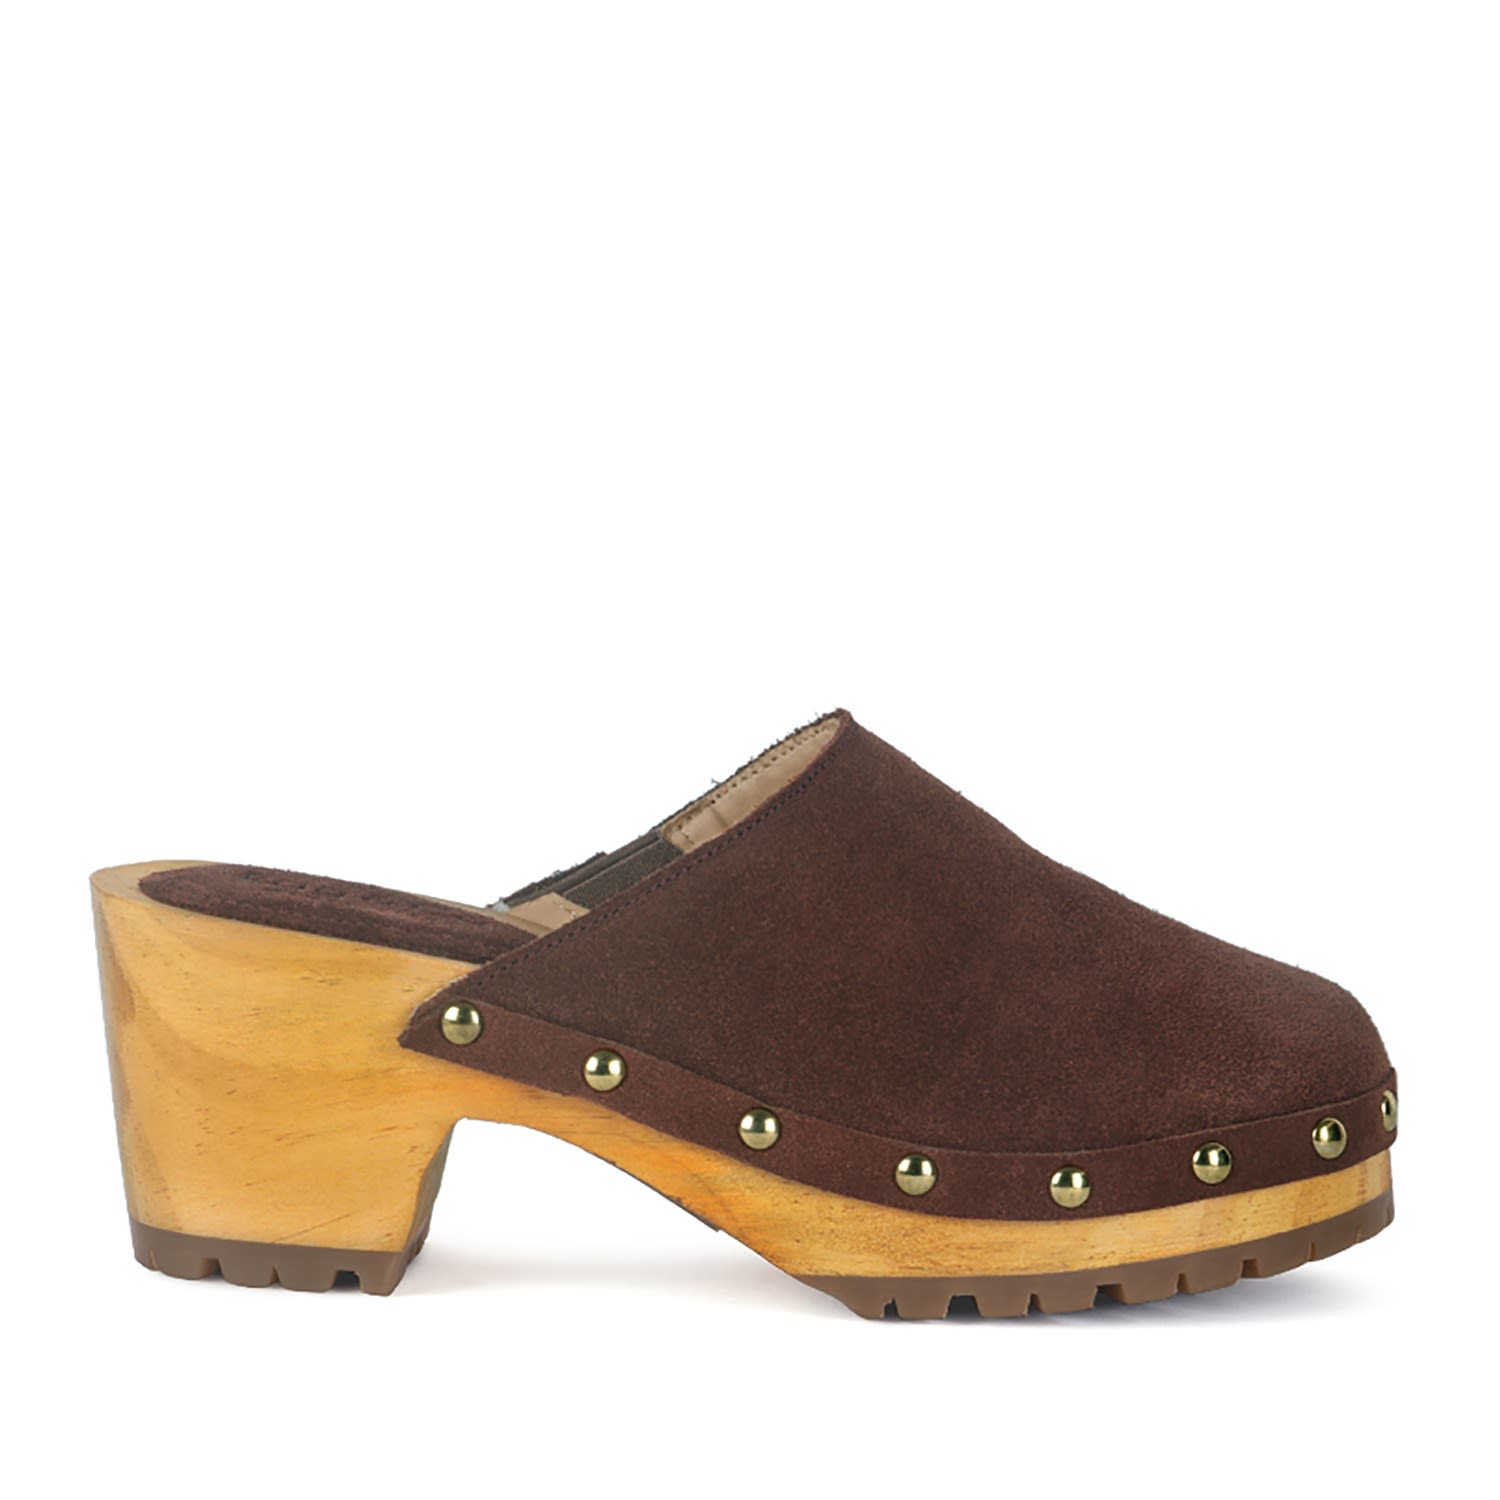 Women’s Cedrus Fine Suede Studded Clog Mules Brown 3 Uk Rag & Co.